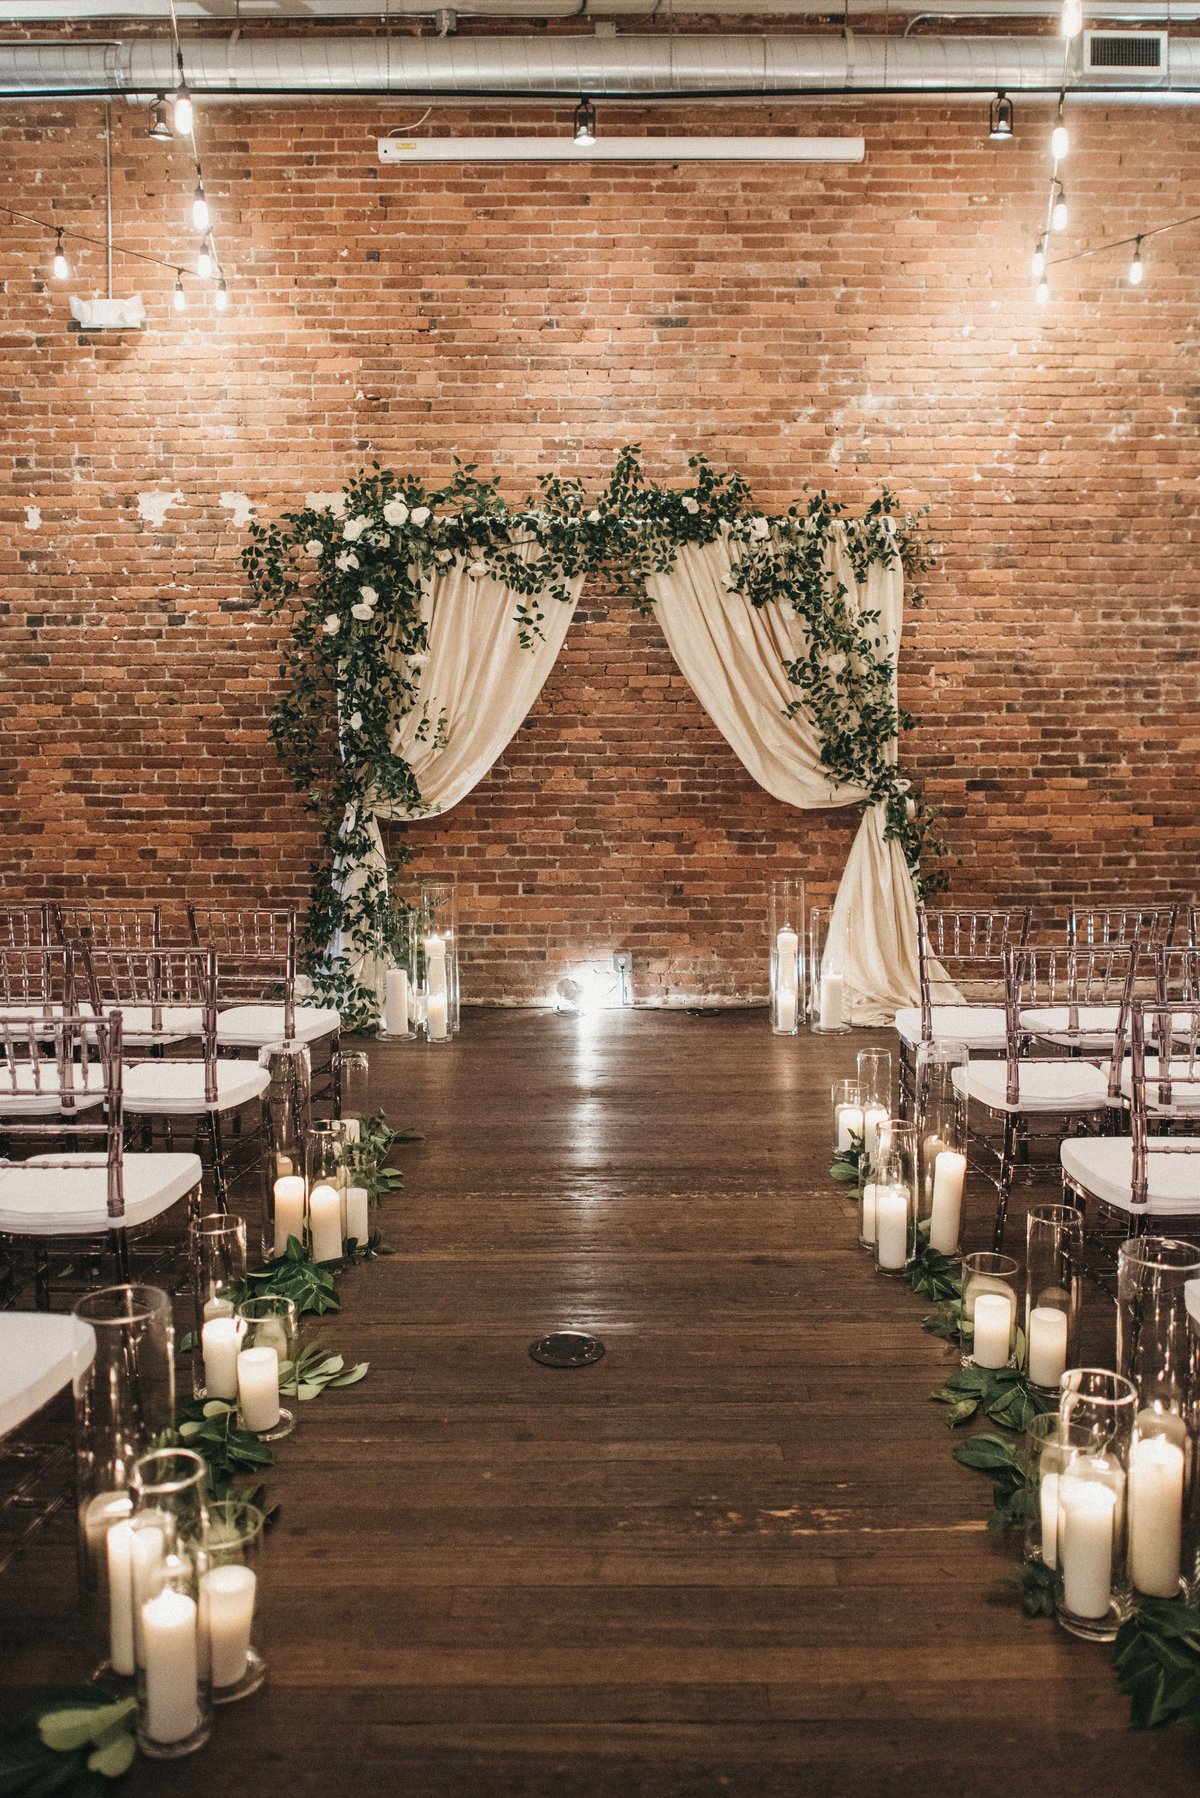 Axis Pioneer wedding with draped wedding arbor covered in greenery and aisle lined in candles and greenery